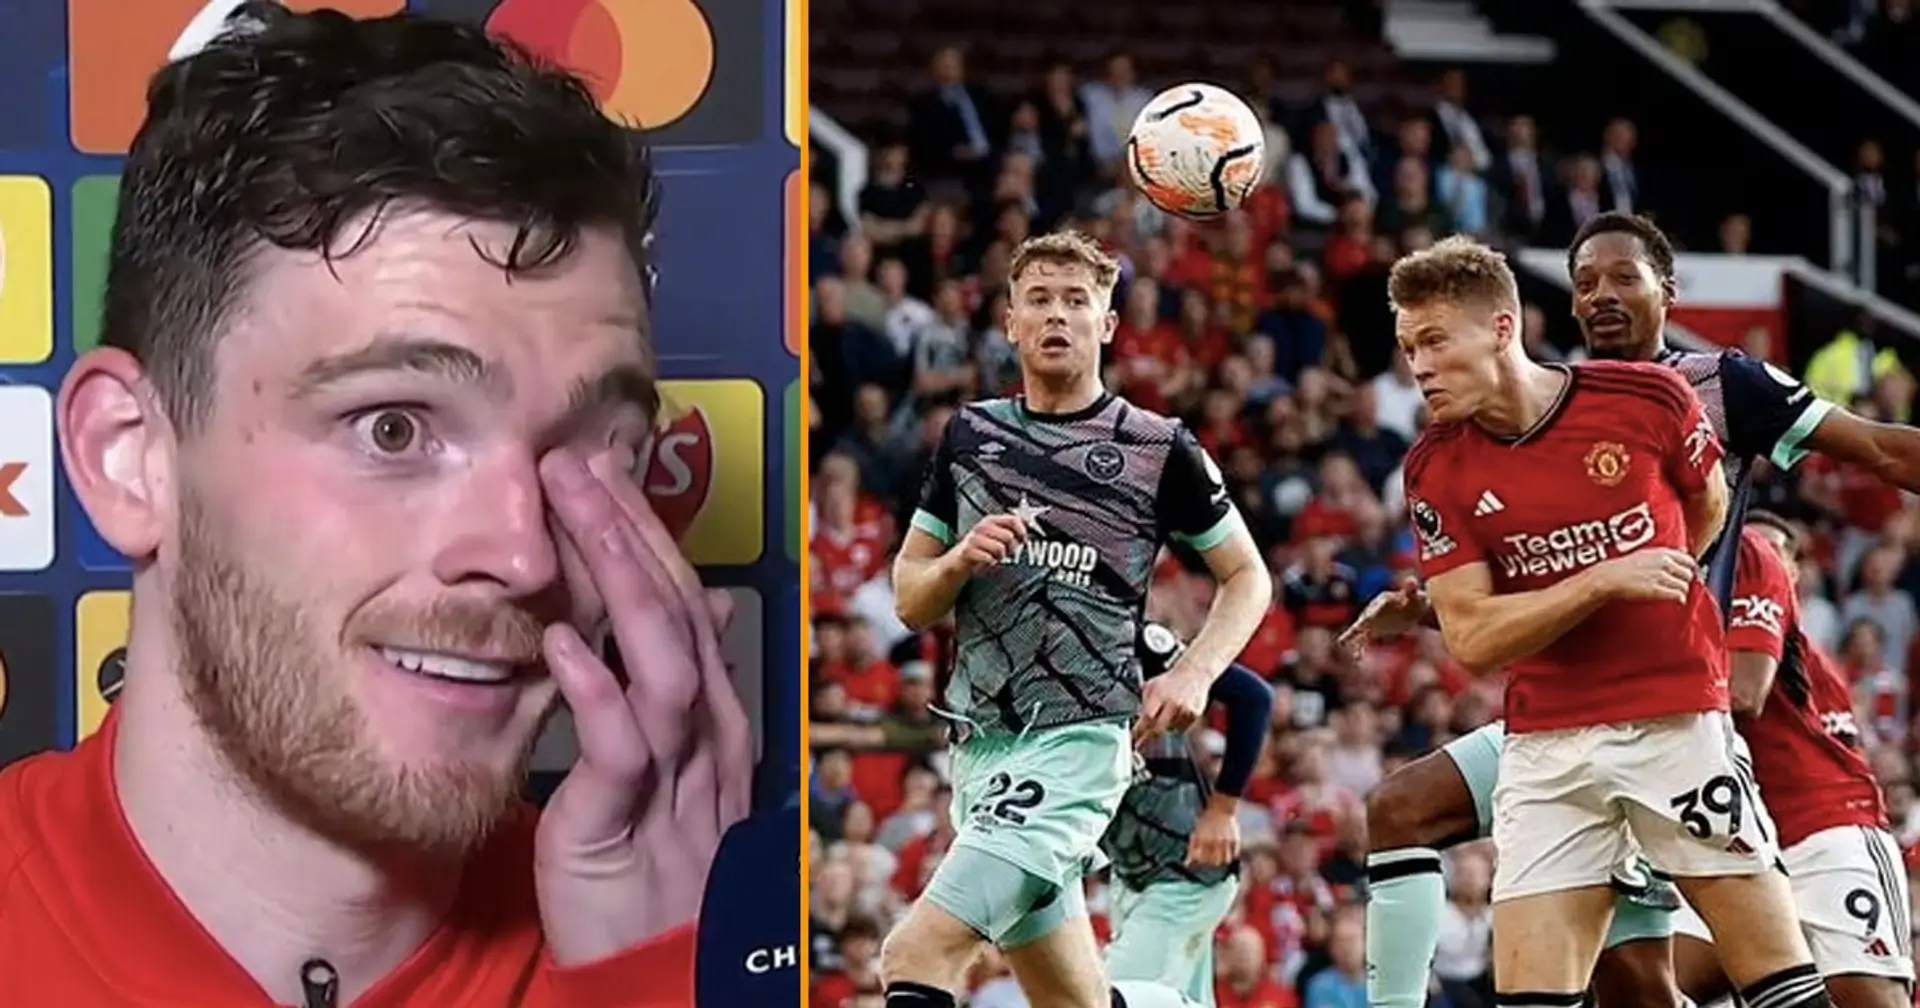 Andy Robertson's prediction on Man United's goalscorer couldn't have aged any better